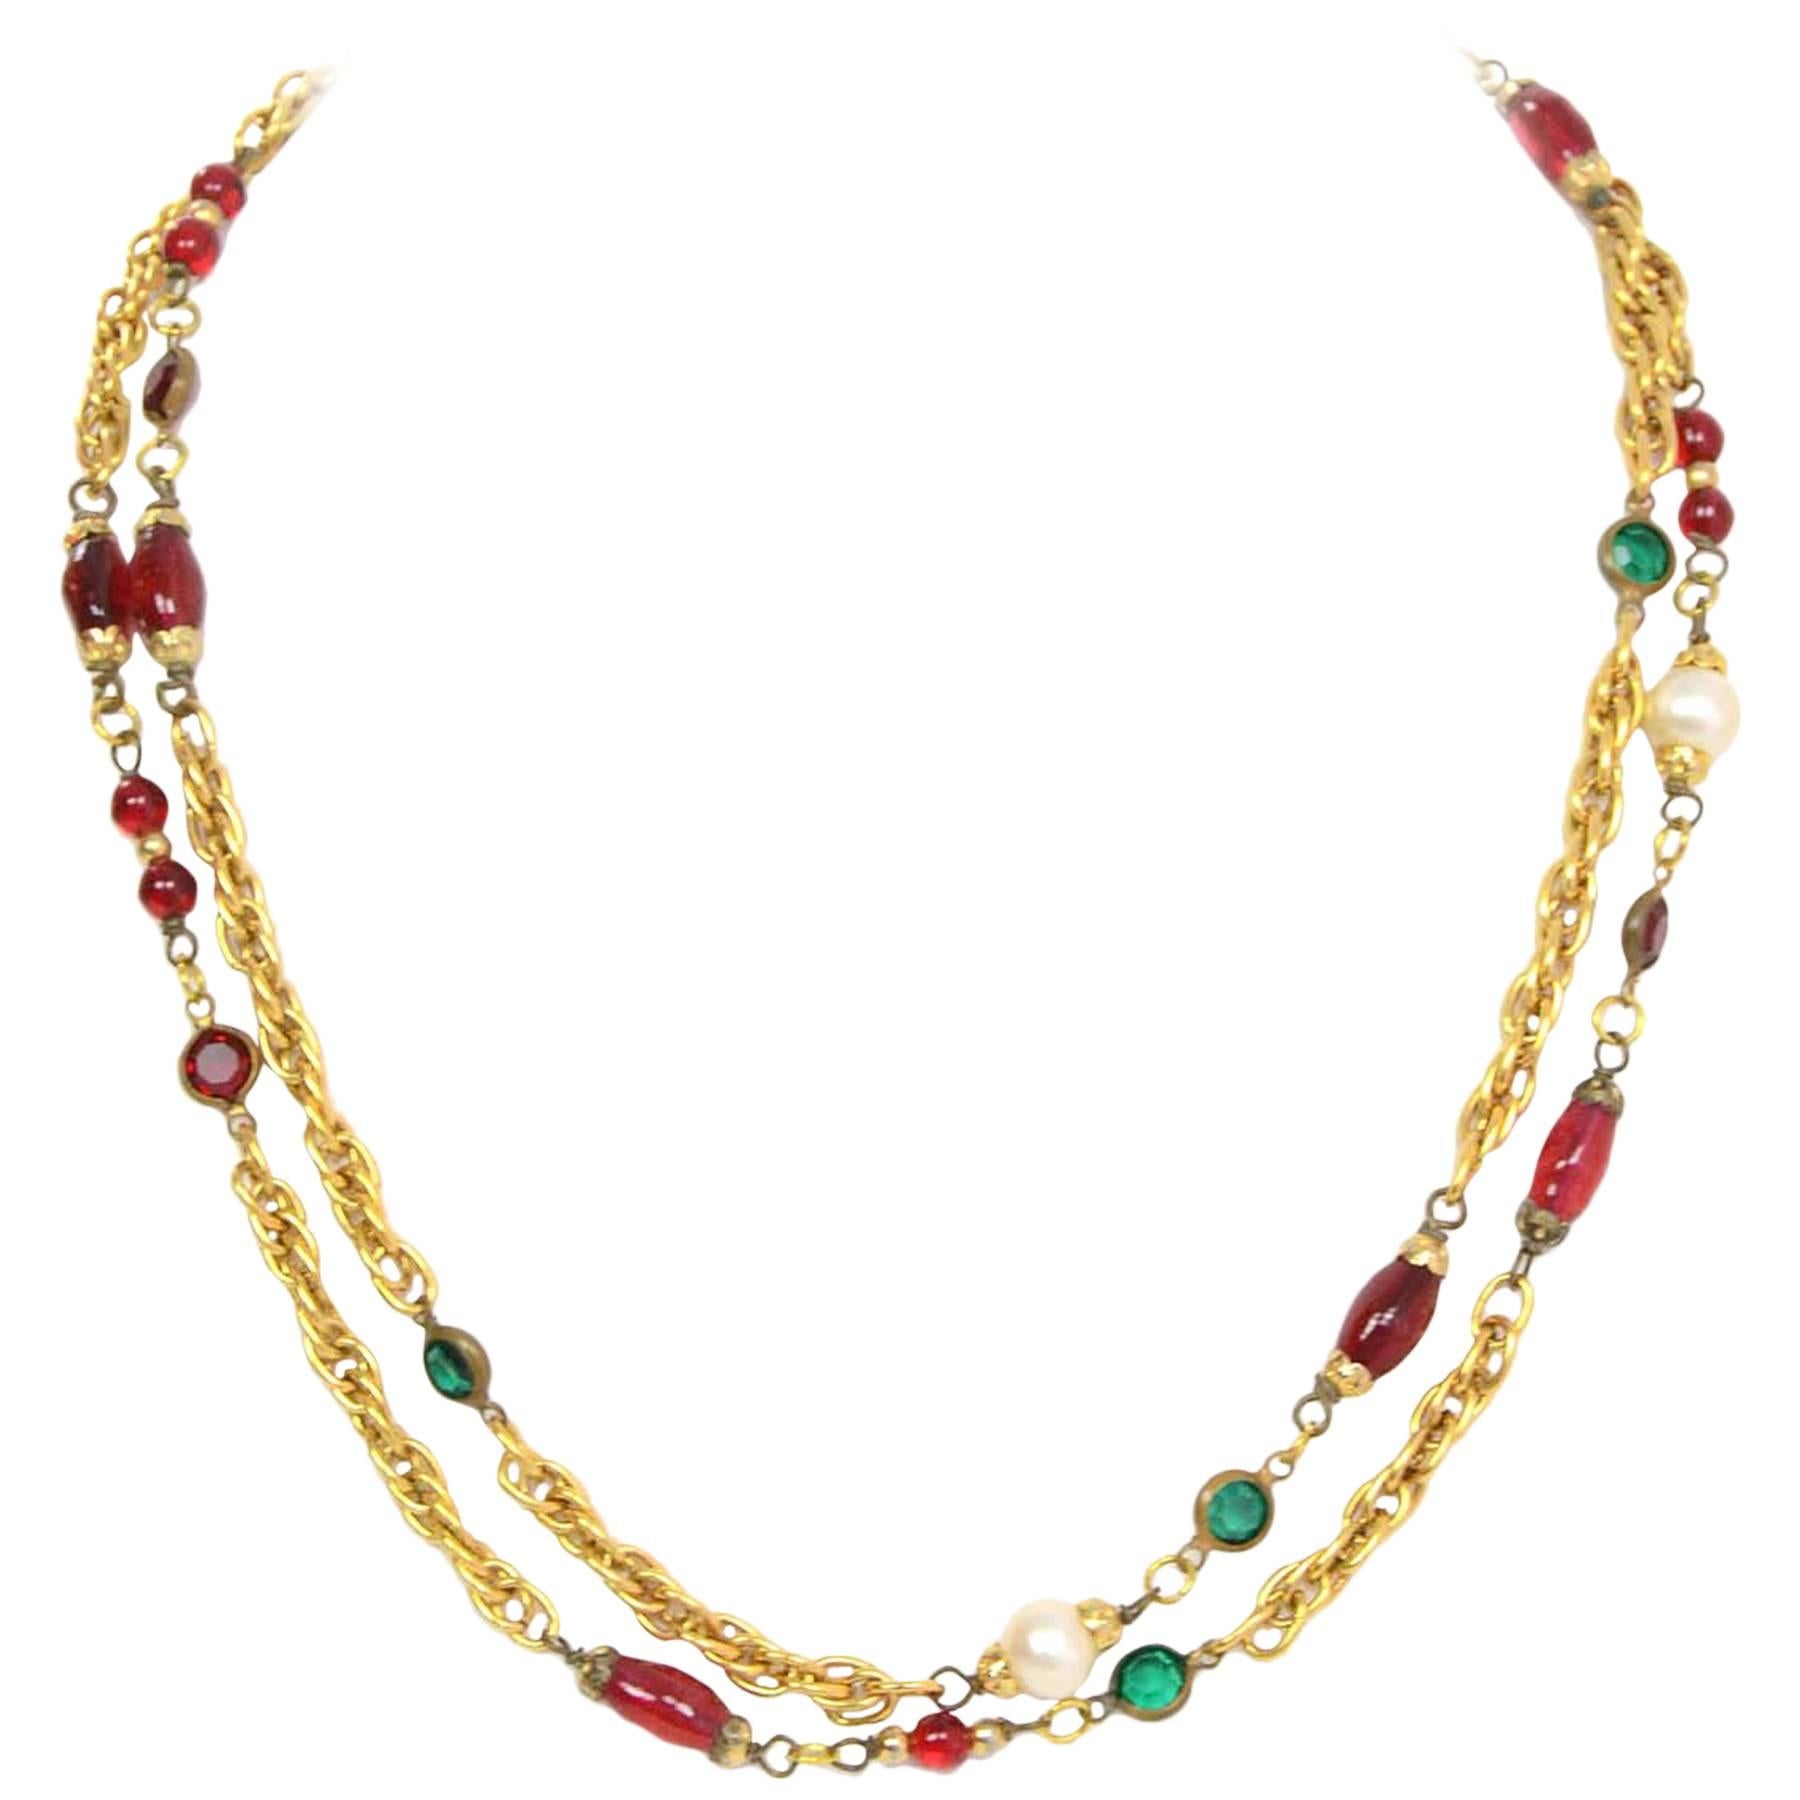 Chanel Gripoix & Pearl Long Strand Necklace
Features red gripoix, red and green crystals and faux pearls throughout
Made in: France
Year of Production: 1984
Color: Red, green, ivory and goldtone
Materials: Strass crystals, gripoix, metal,